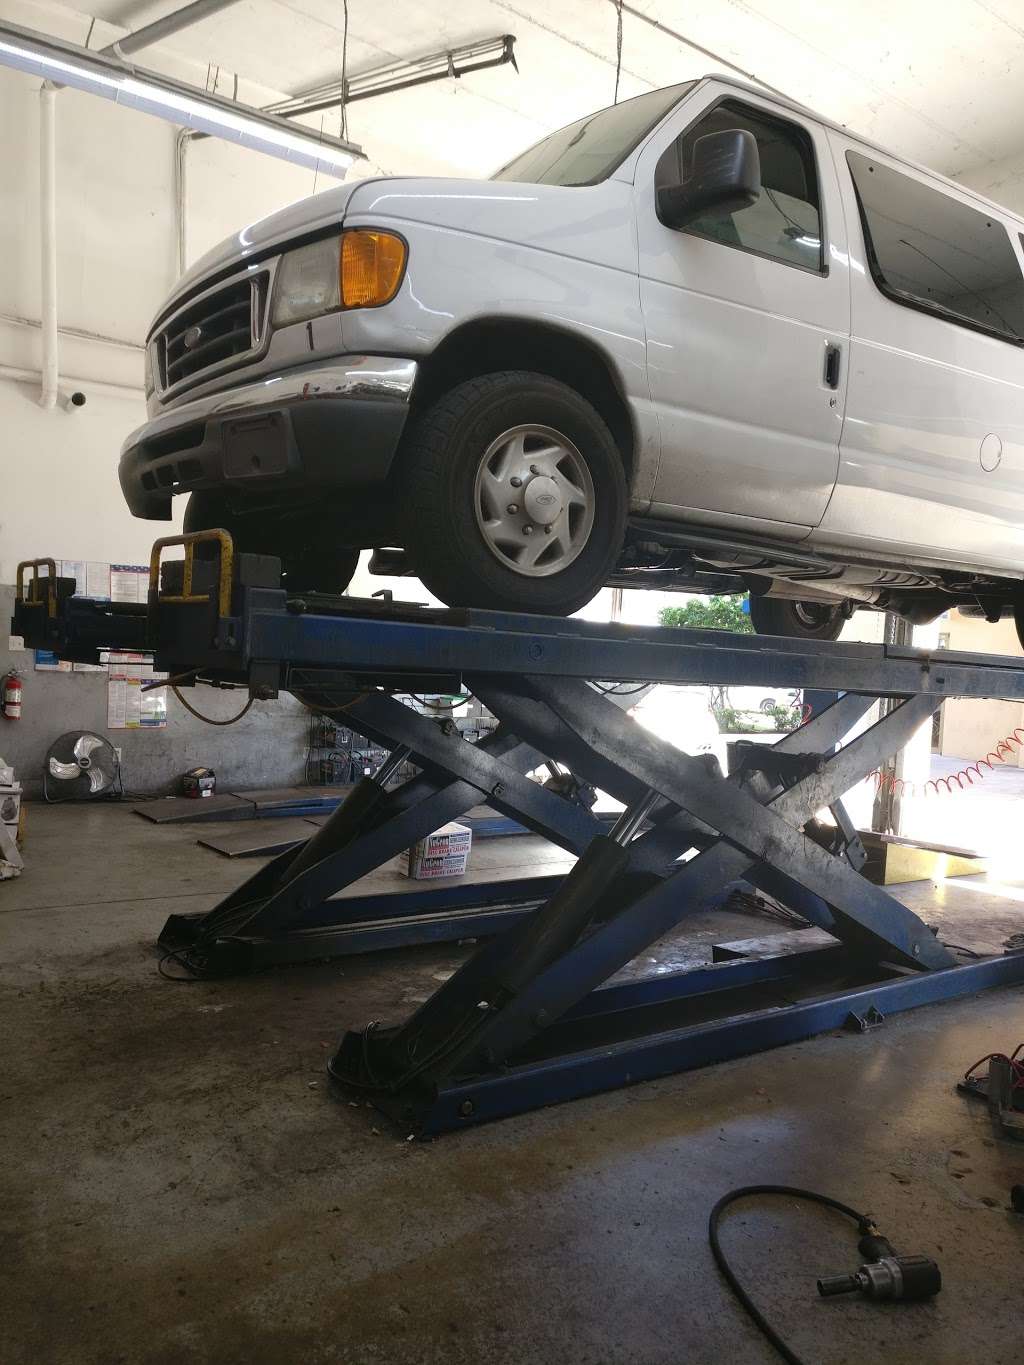 Dr. Brakes - Complete Auto Repair | 11590 Wiles Rd, Coral Springs, FL 33076 | Phone: (954) 345-7887